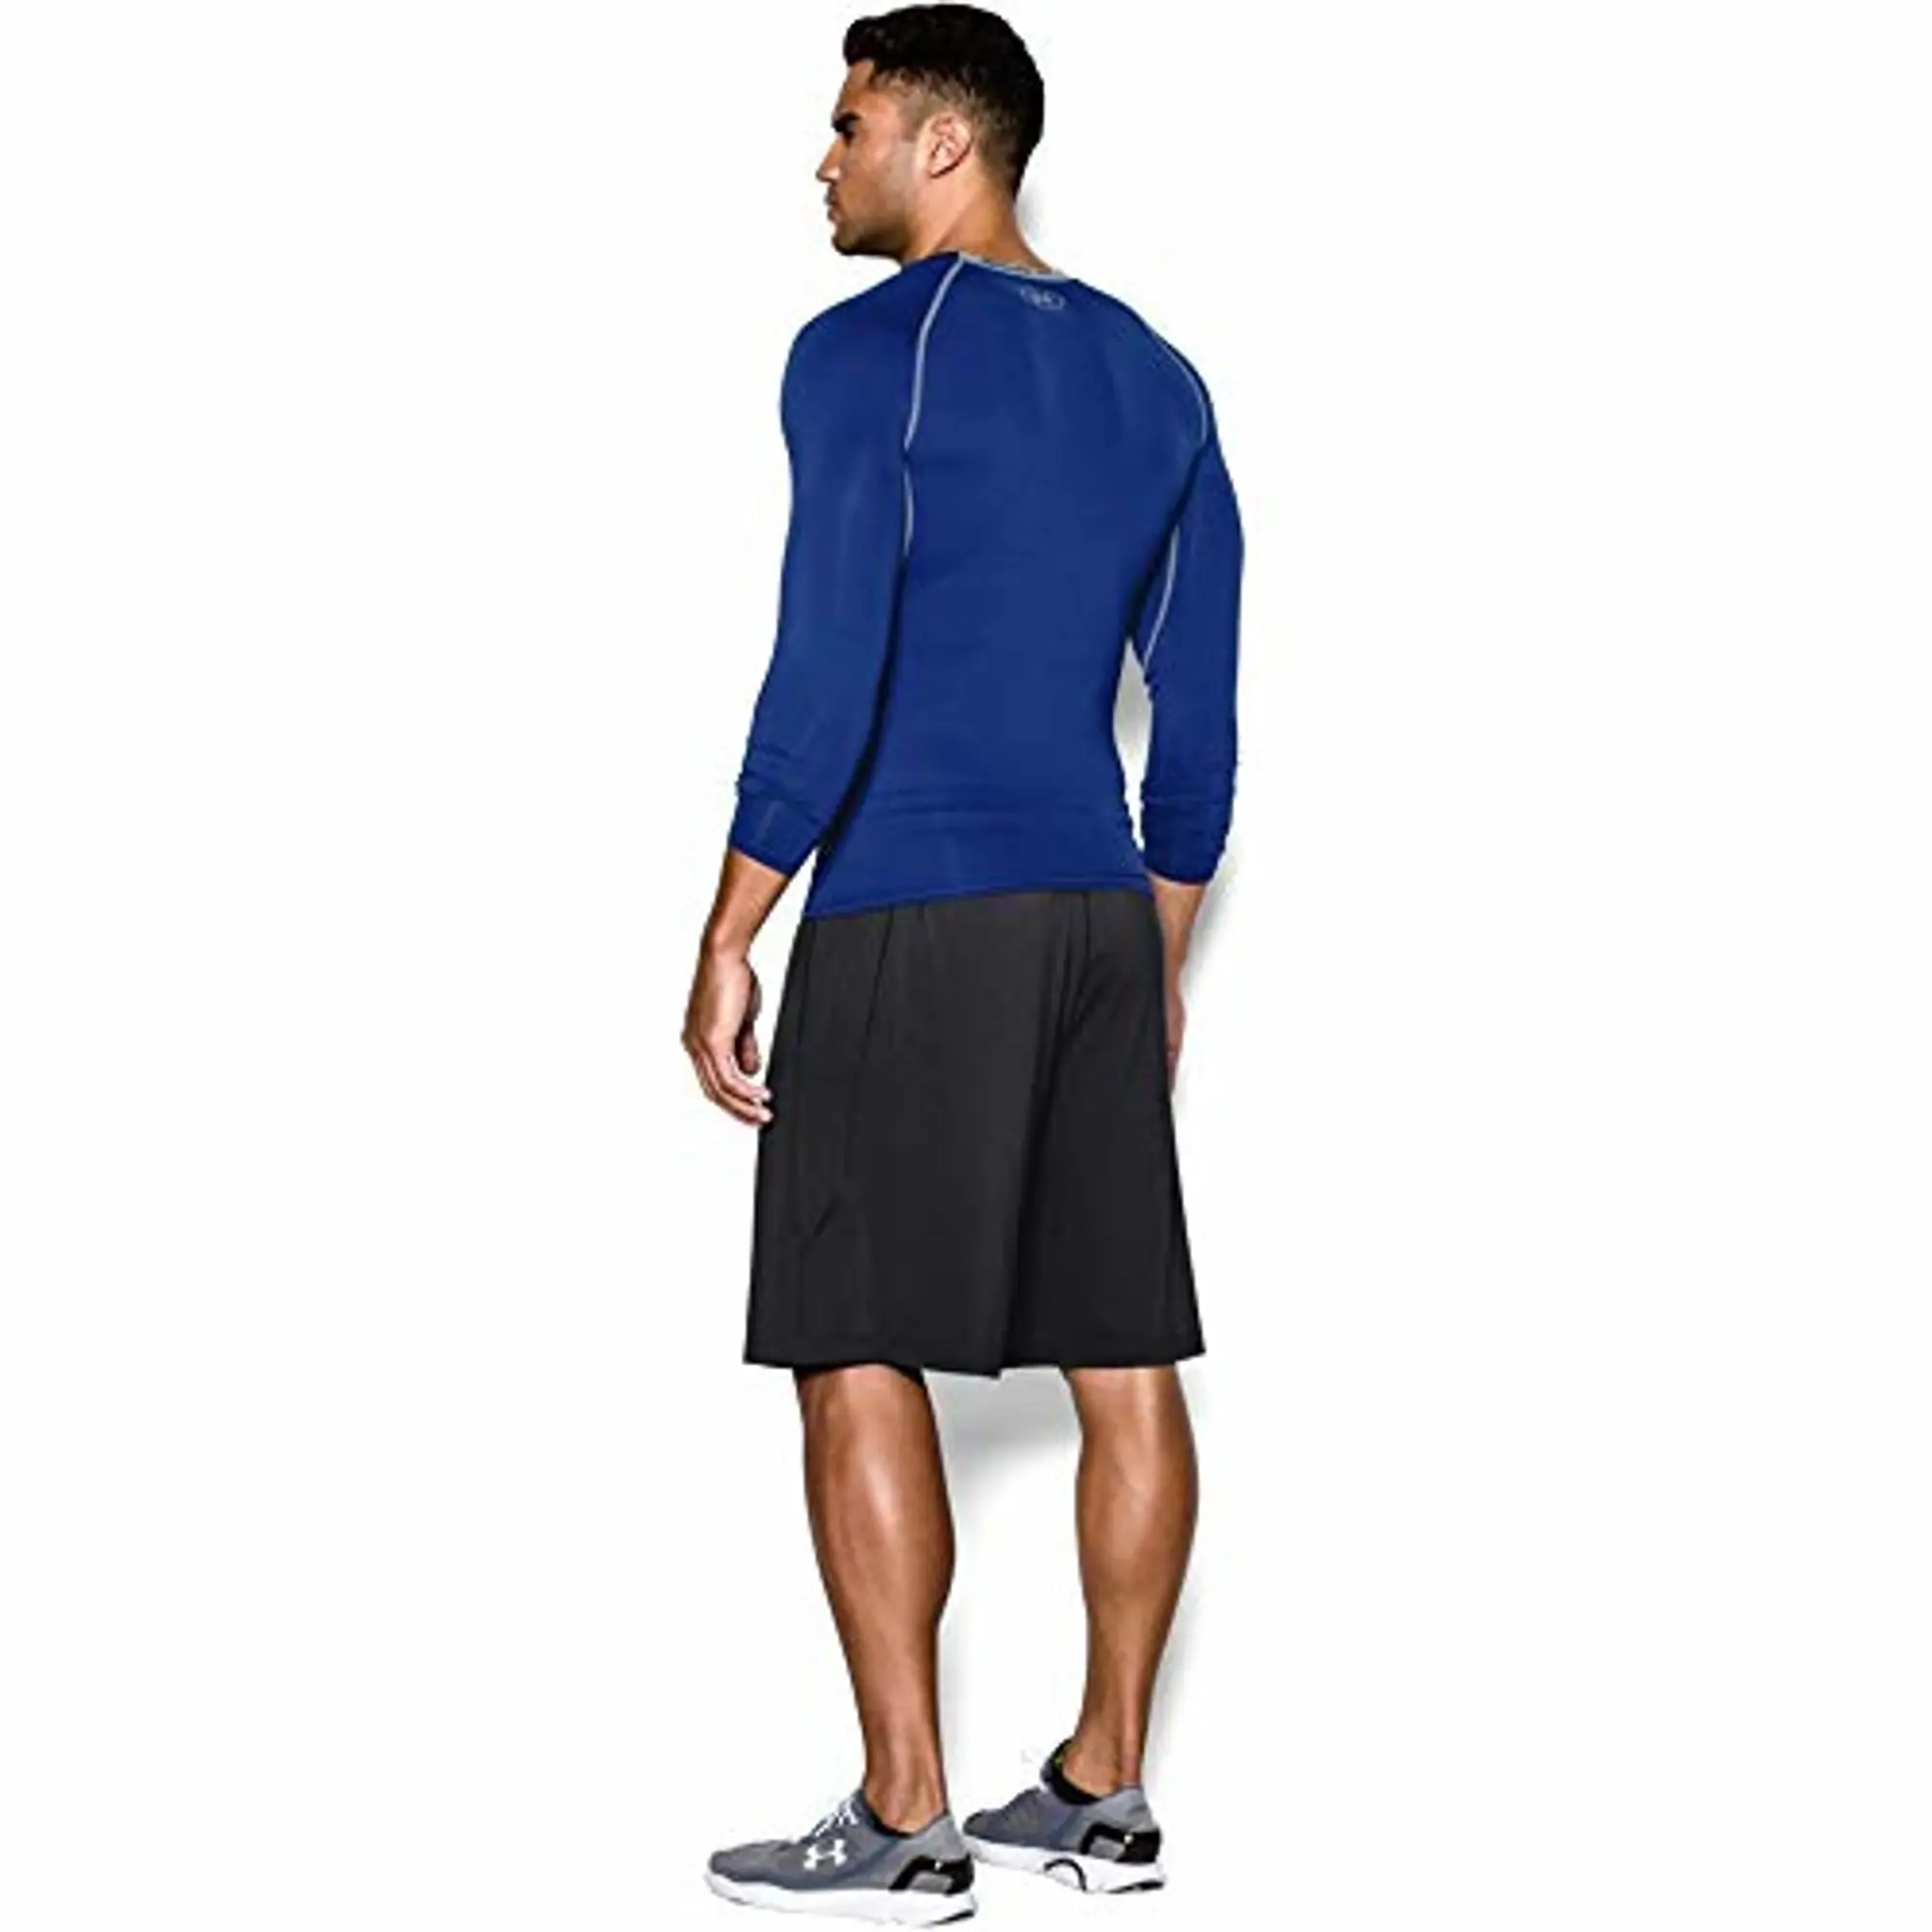 Under Armour Heat Gear Long Sleeve Compression Top